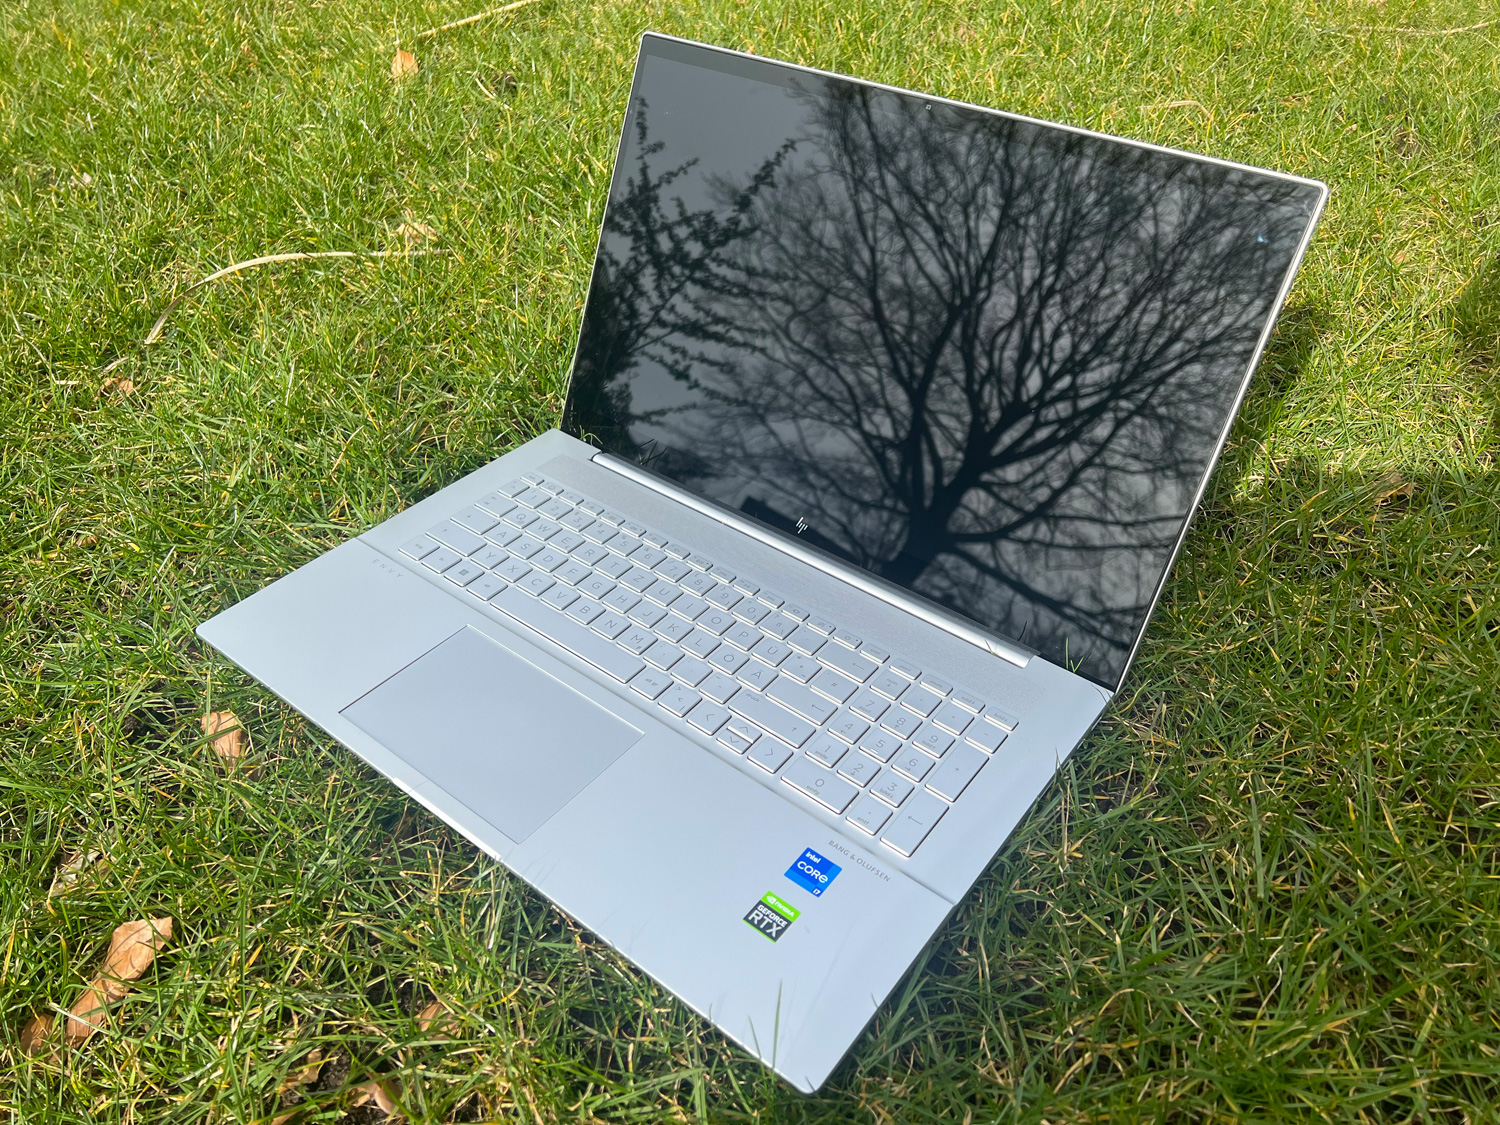 HP Envy 16 review: creative performance for less